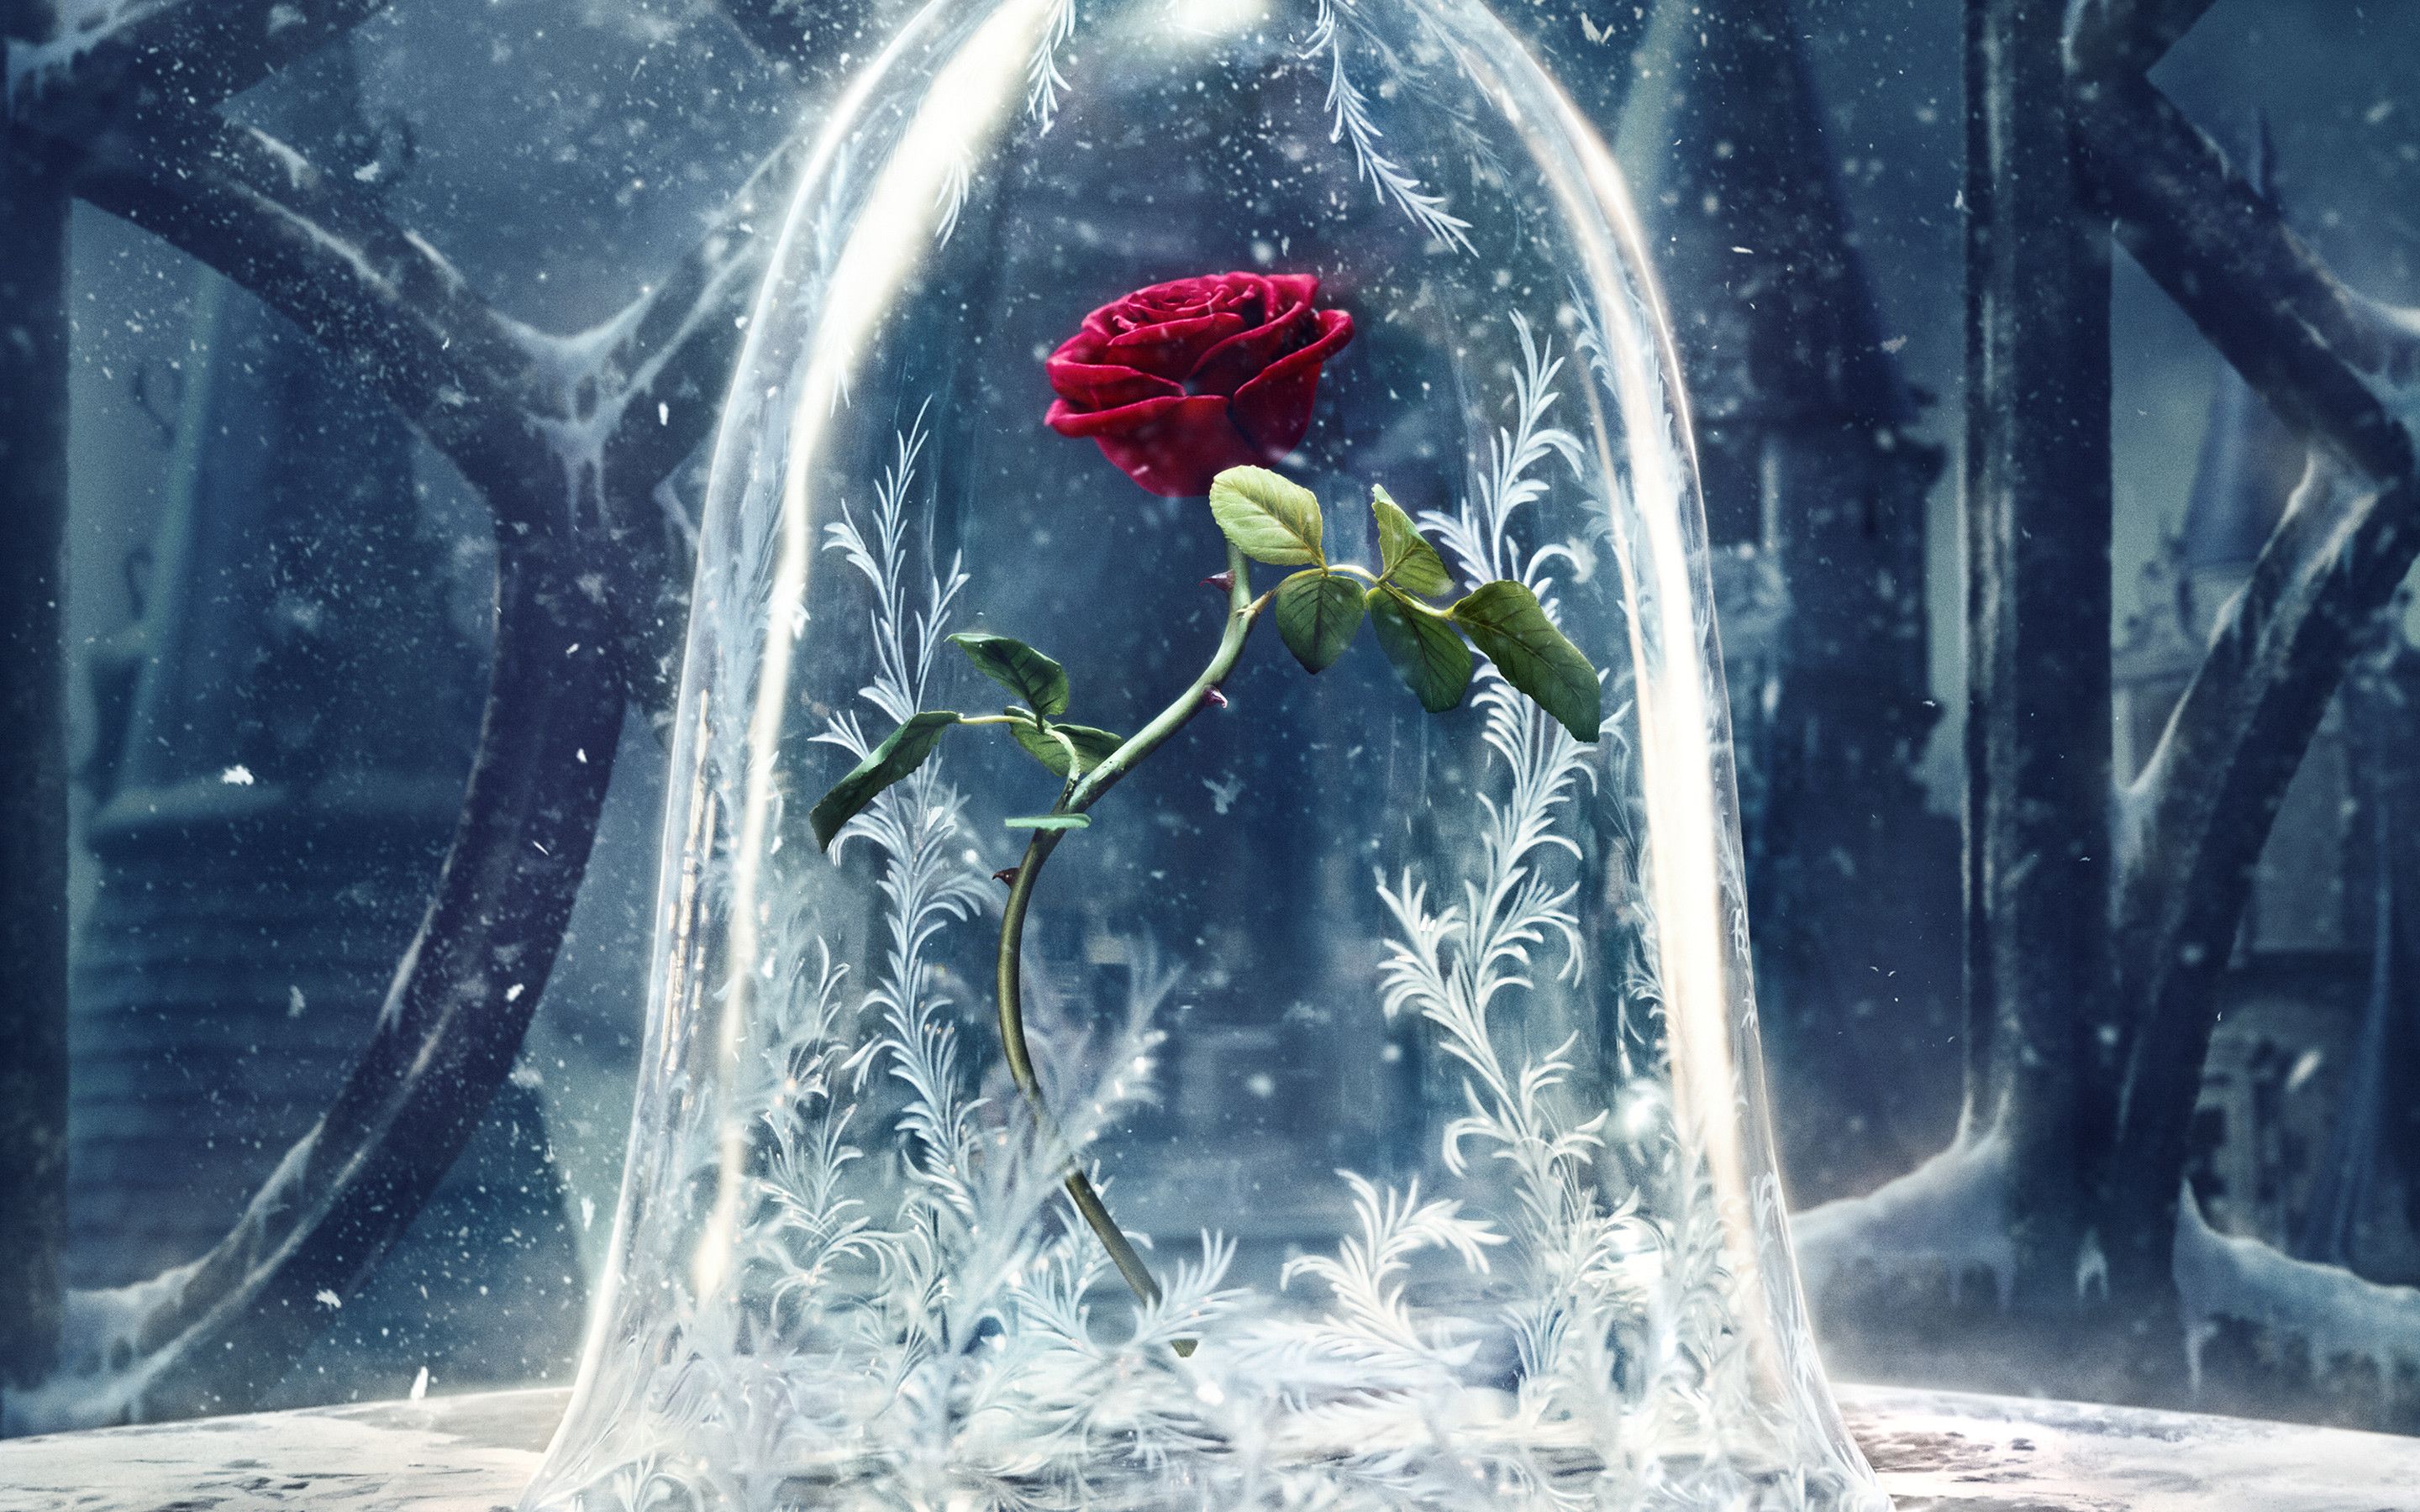 Free download Beauty and the Beast Wallpaper - [2880x1800] for your Desktop, Mobile & Tablet. Explore Beast Wallpaper. Beast Wallpaper, Beast Wallpaper, Body Beast Wallpaper